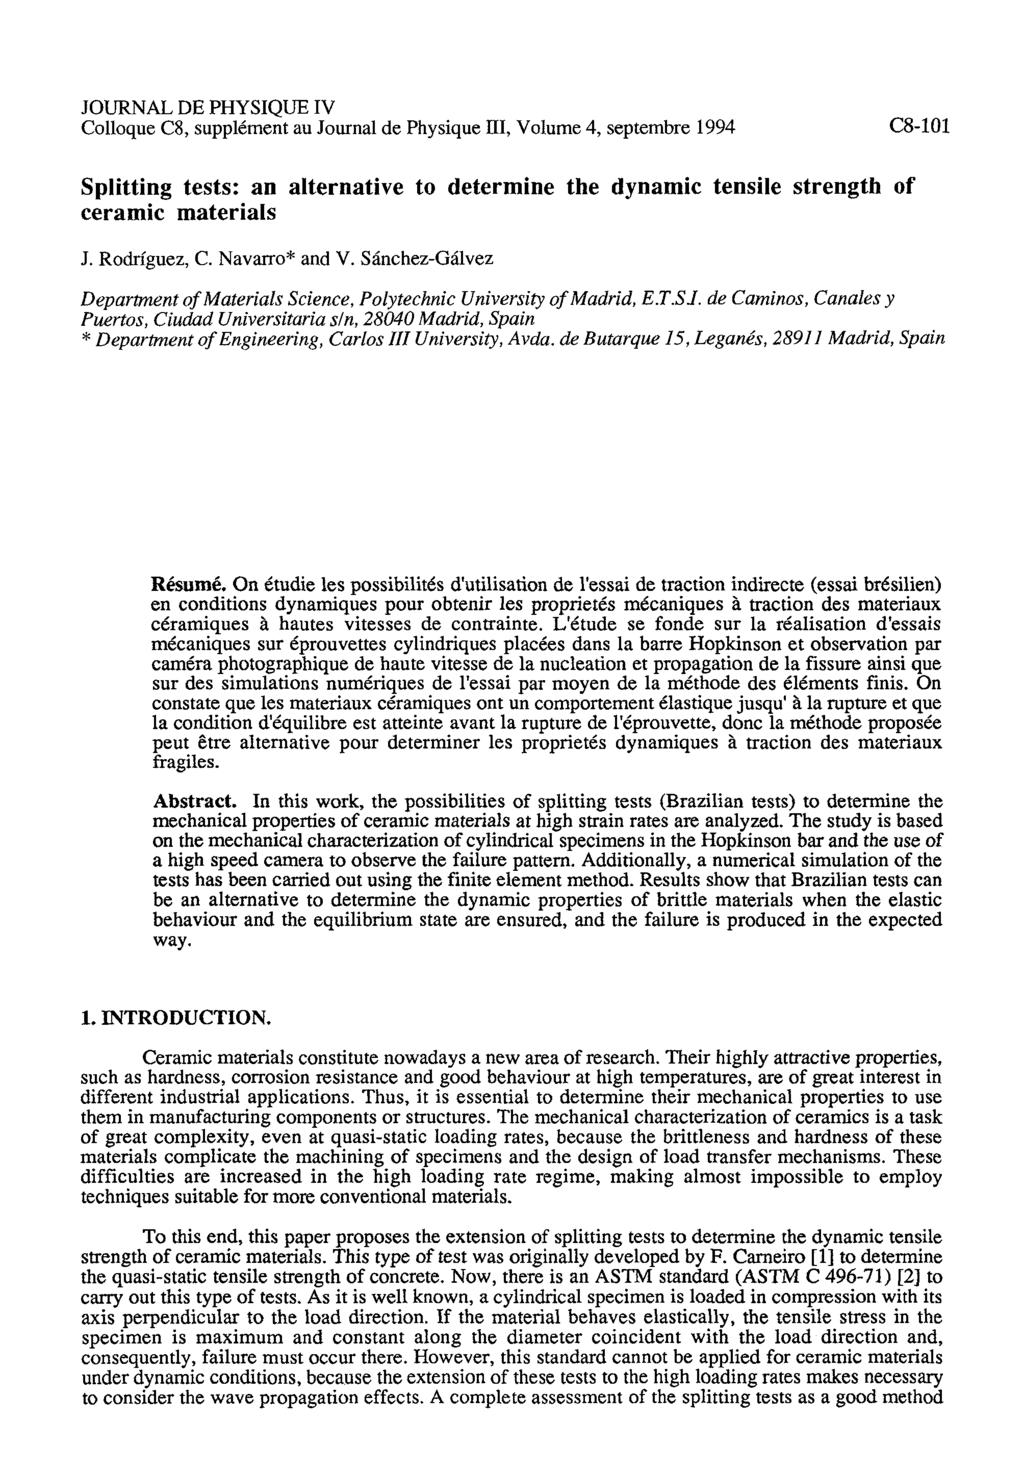 JOURNAL DE PHYSIQUE IV Colloque C8, suppltment au Journal de Physique 111, Volume 4, septembre 1994 C8-101 Splitting tests: an alternative to determine the dynamic tensile strength of ceramic